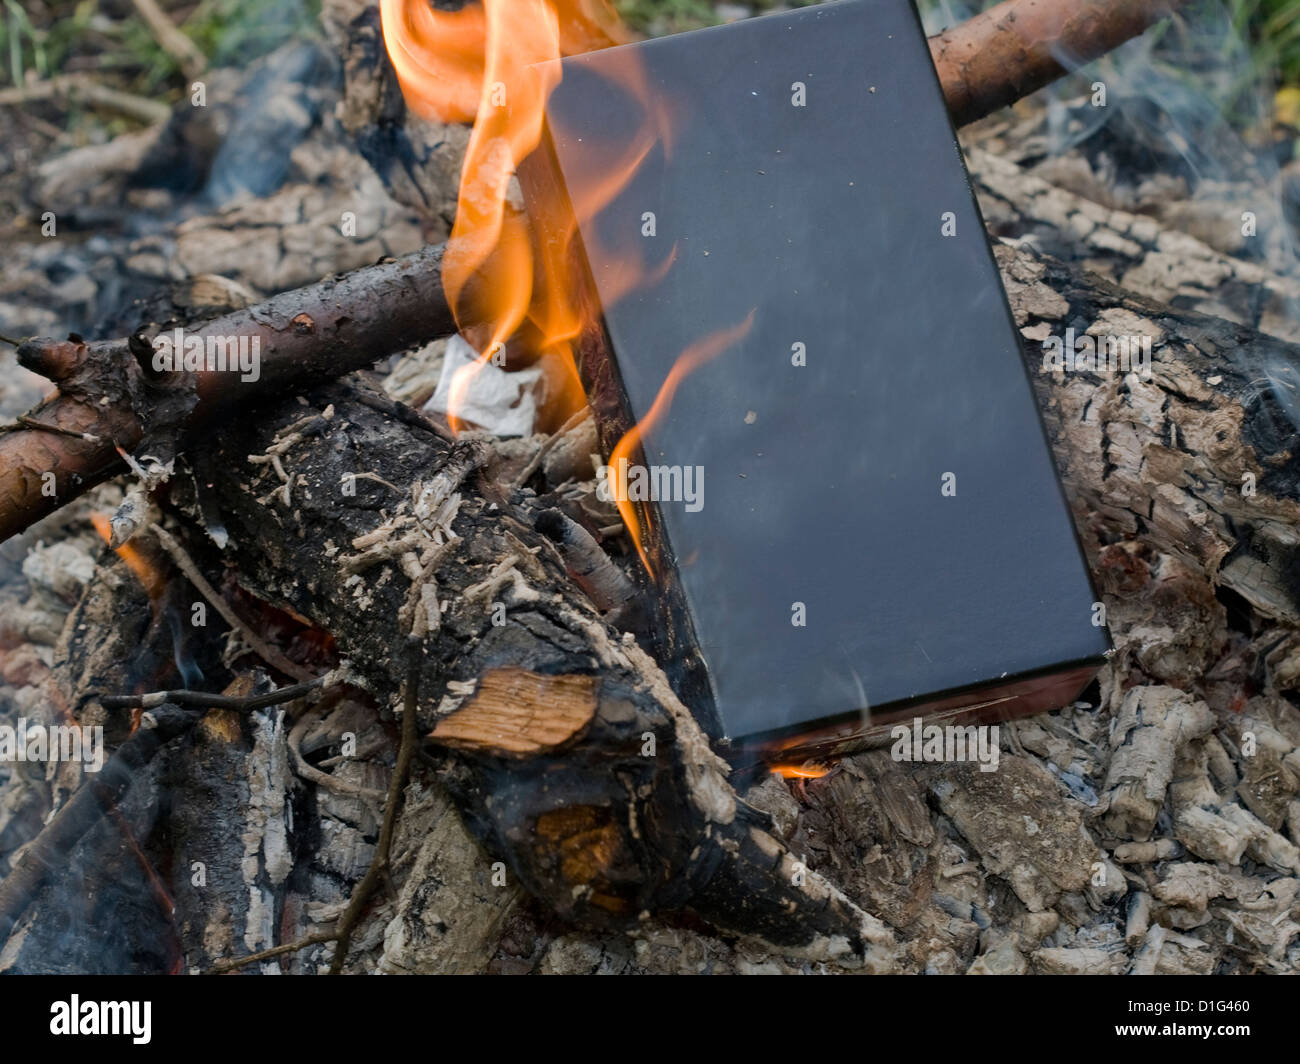 Black box burning in a fire Stock Photo